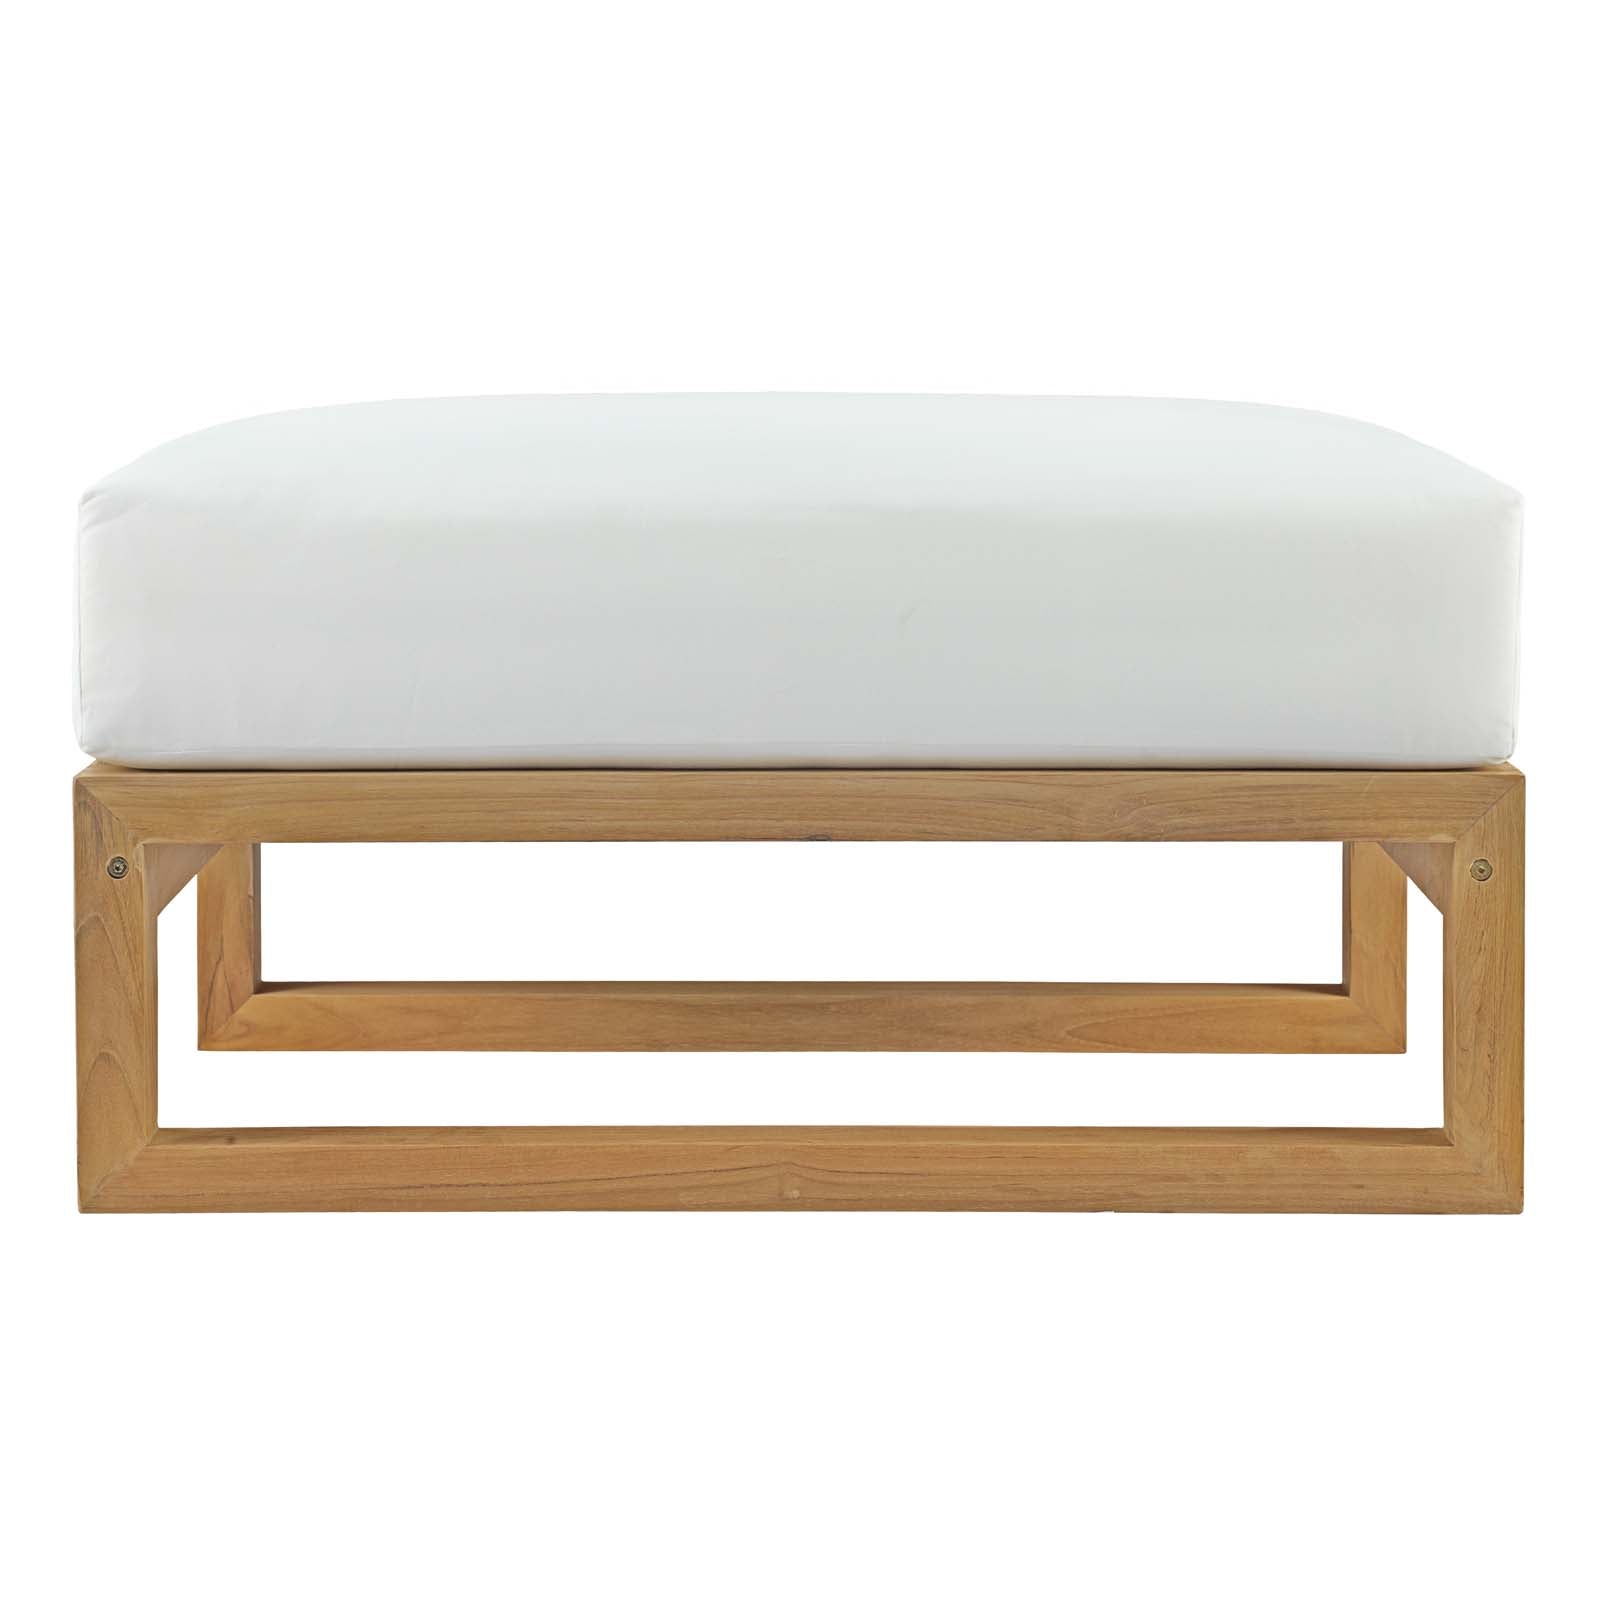 Modway Outdoor Stools & Benches - Upland Outdoor Ottoman Natural & White